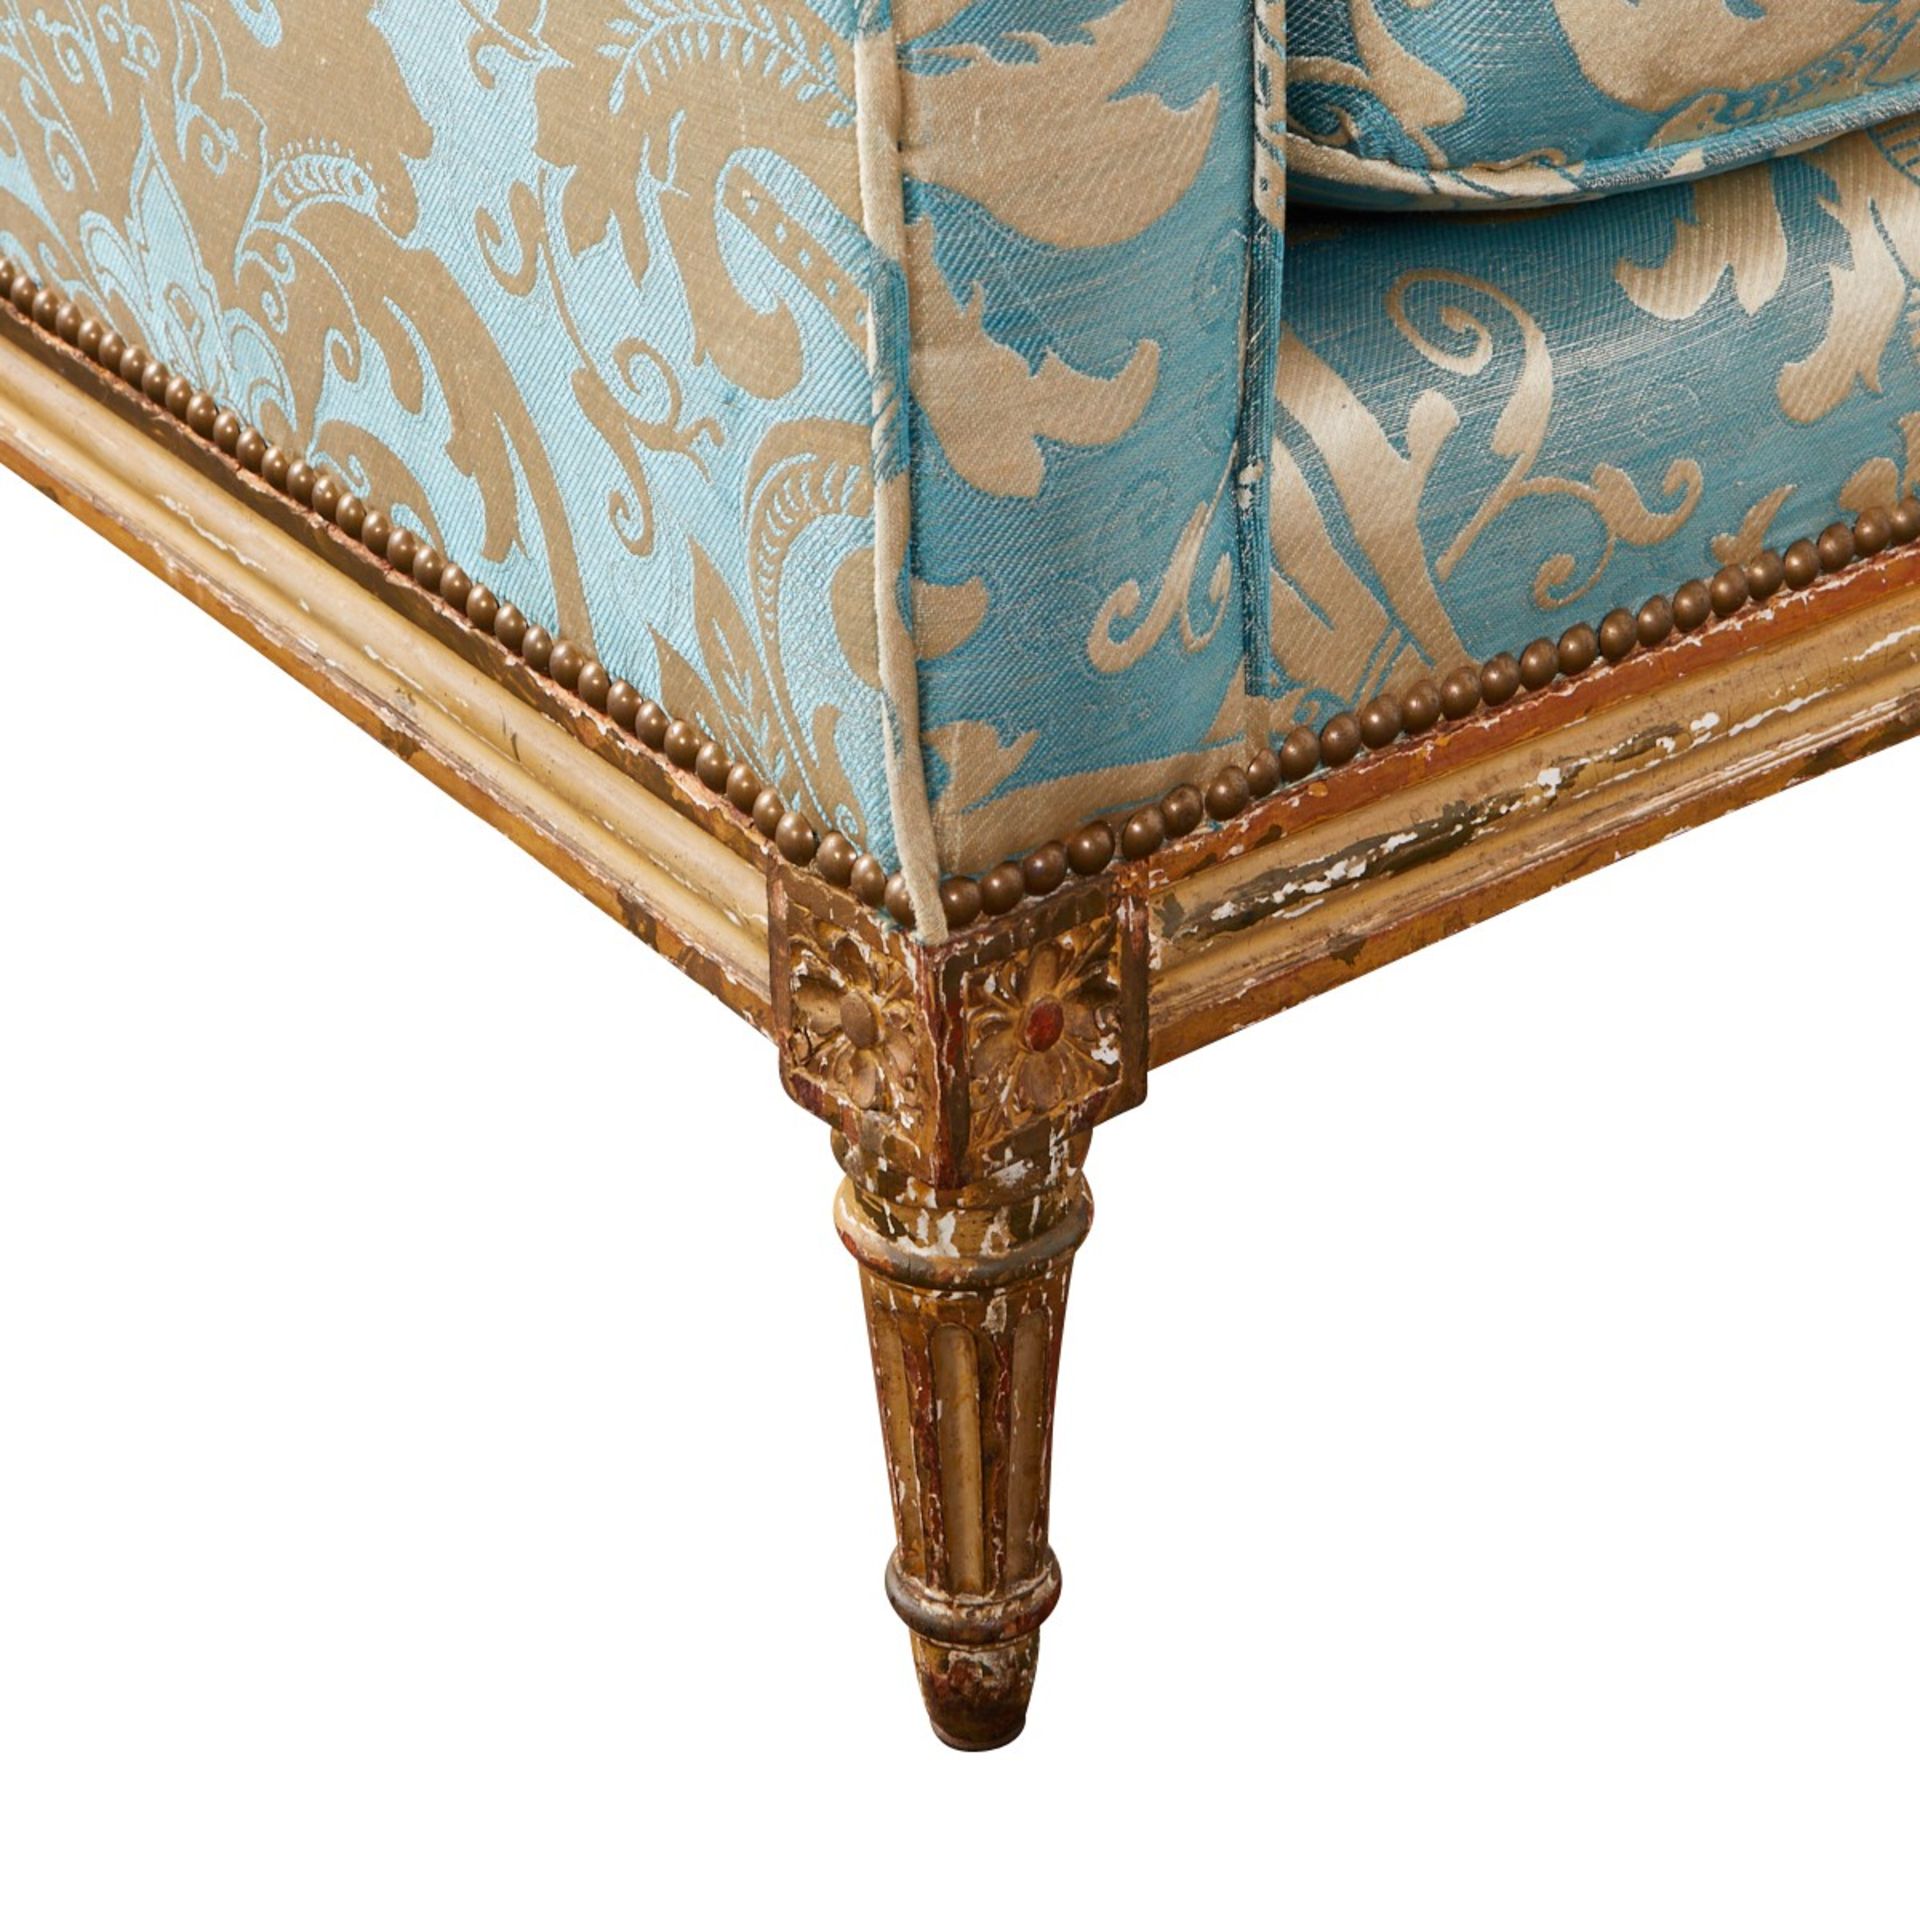 French Upholstered Giltwood Loveseat or Settee - Image 12 of 13